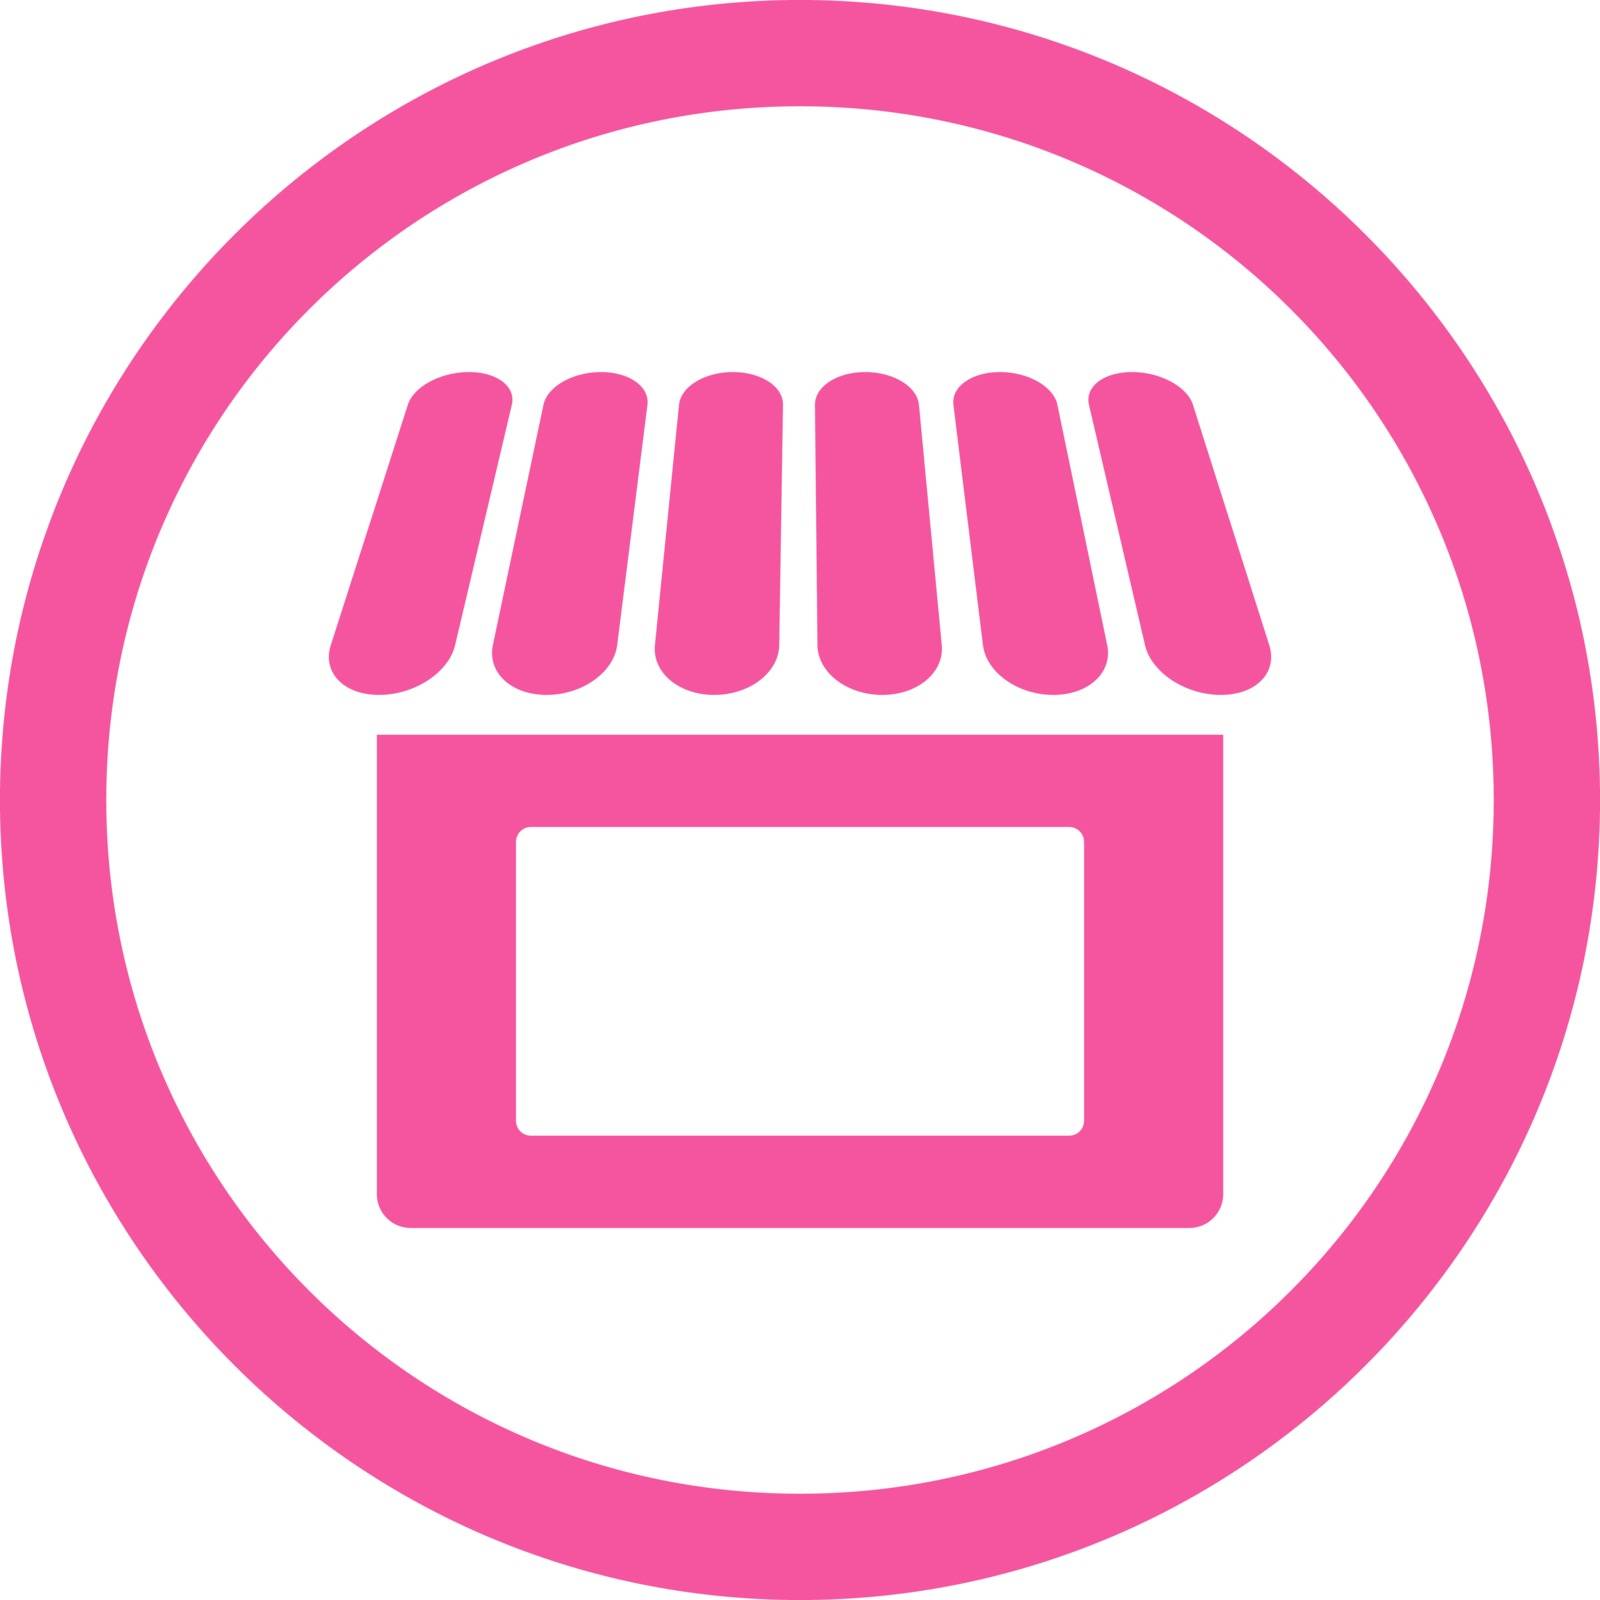 Shop vector icon. This flat rounded symbol uses pink color and isolated on a white background.